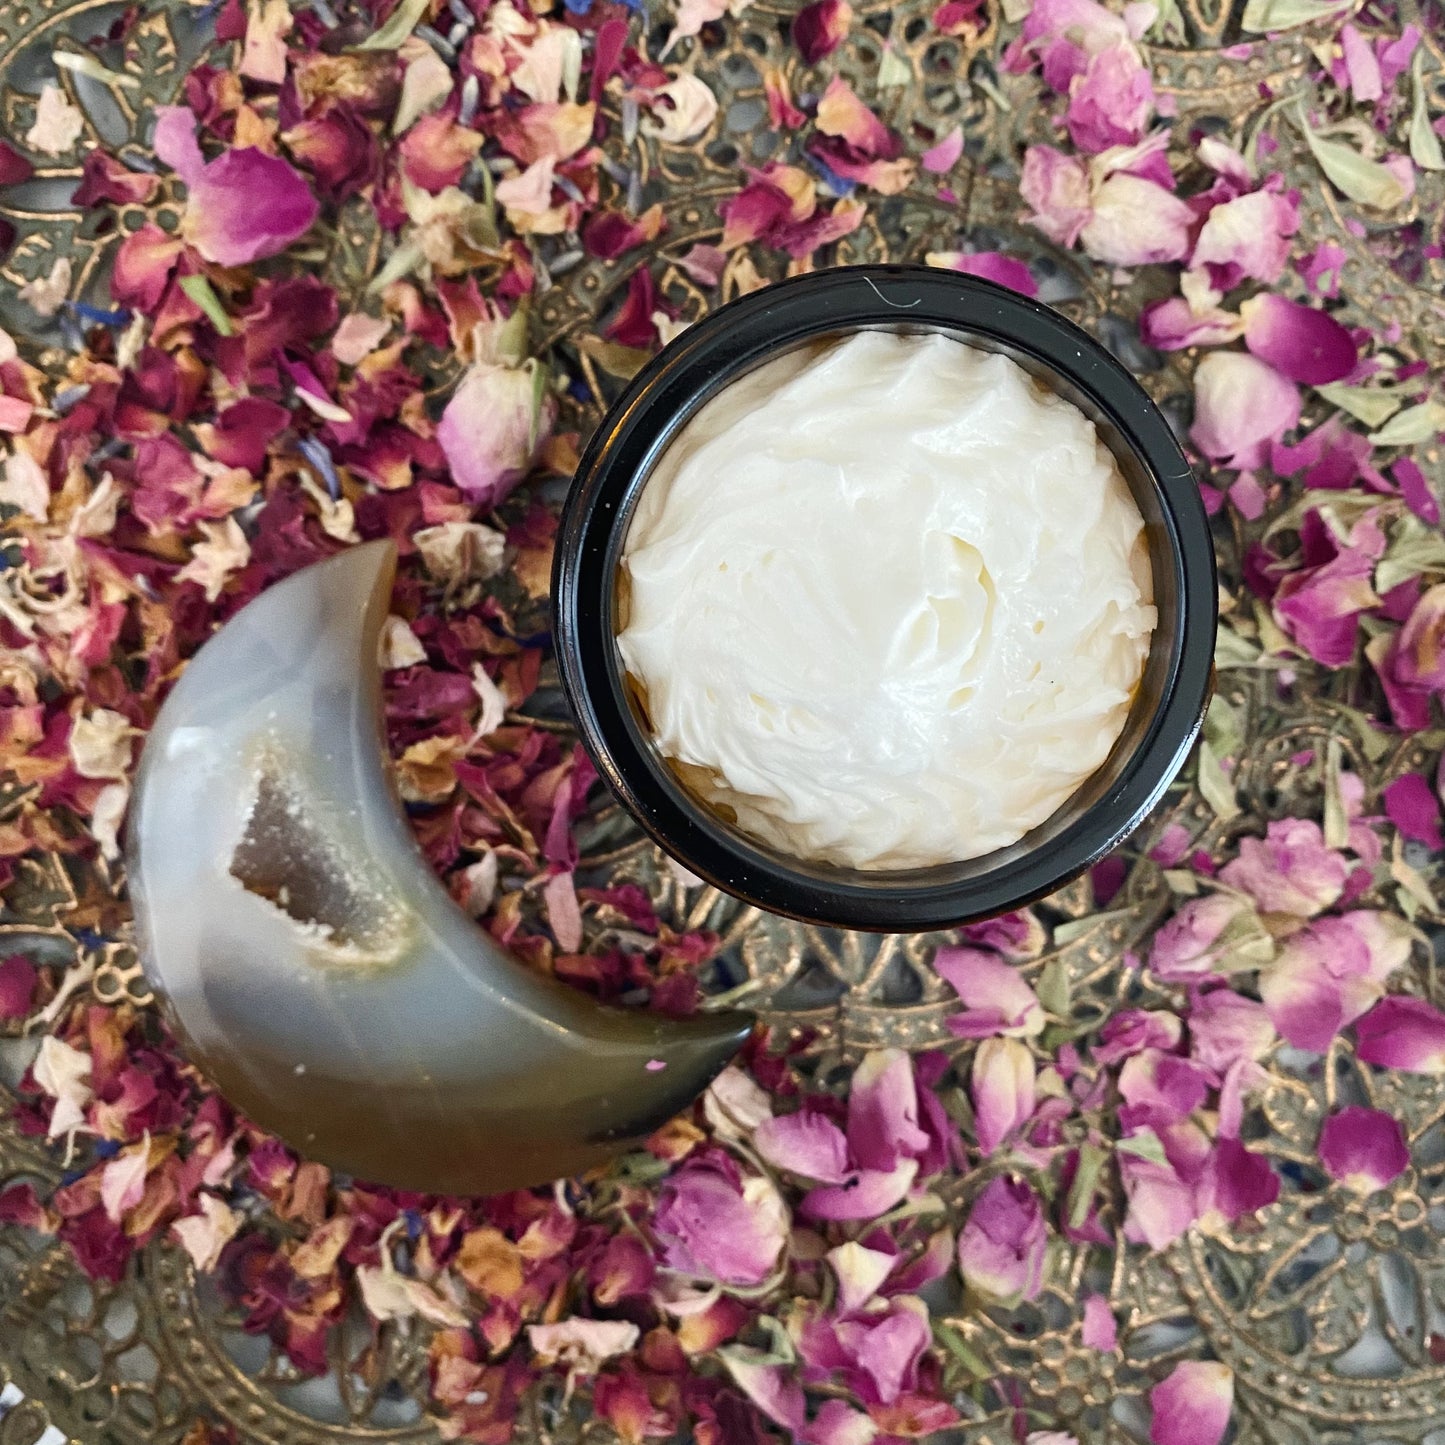 Moon Magic Whipped Body Butter